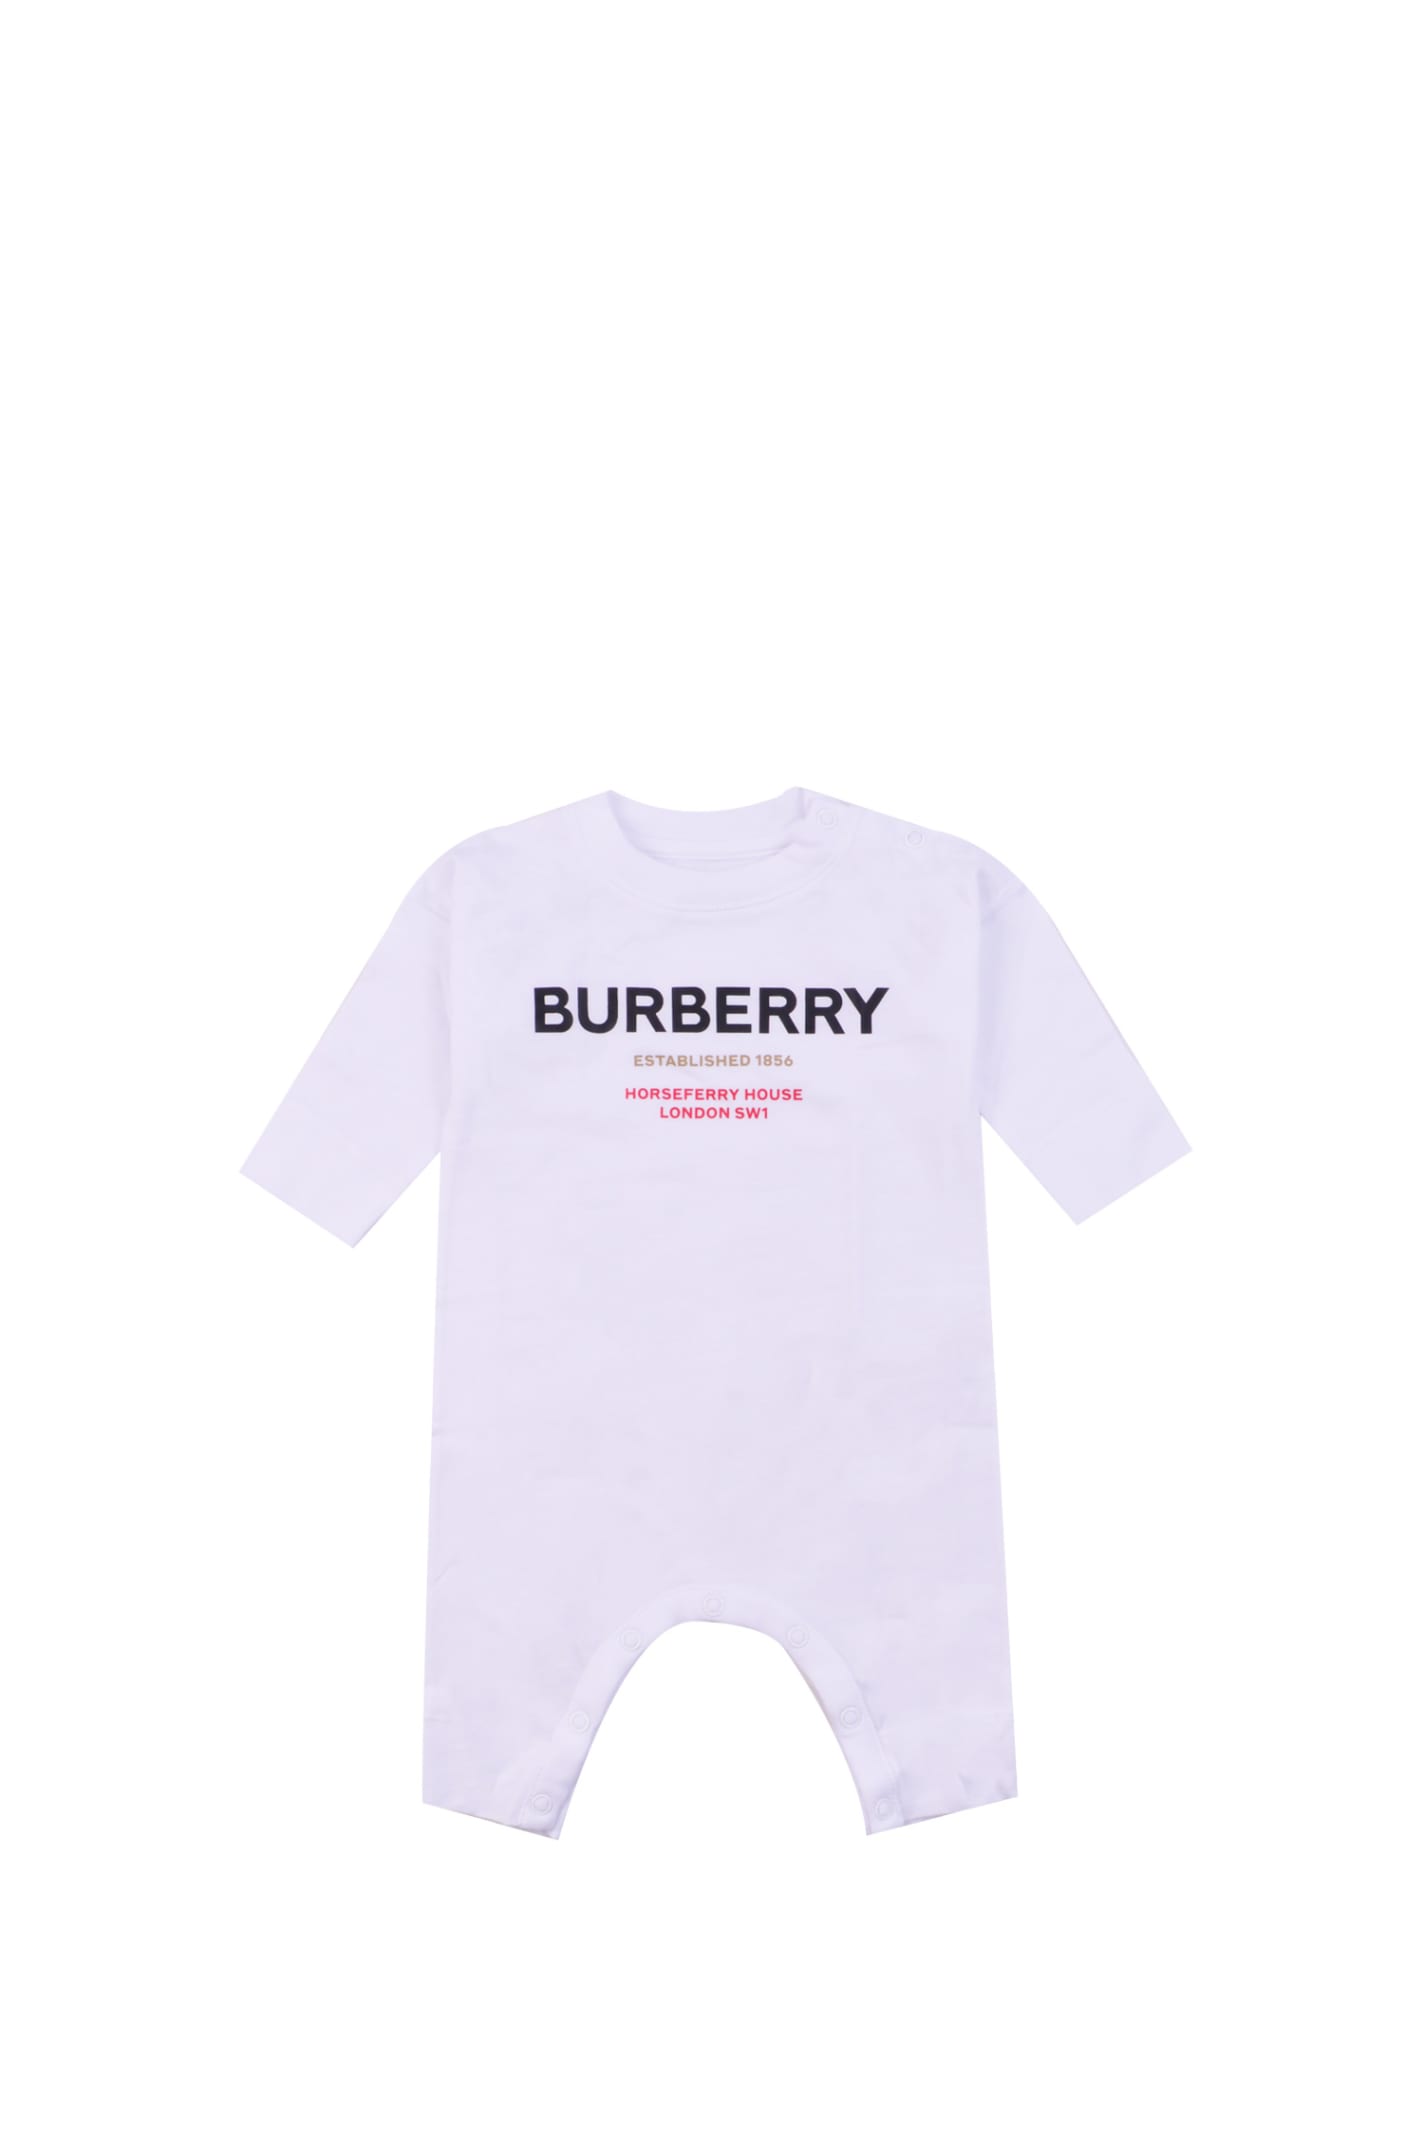 Burberry Babies' Cotton Romper With Print In White